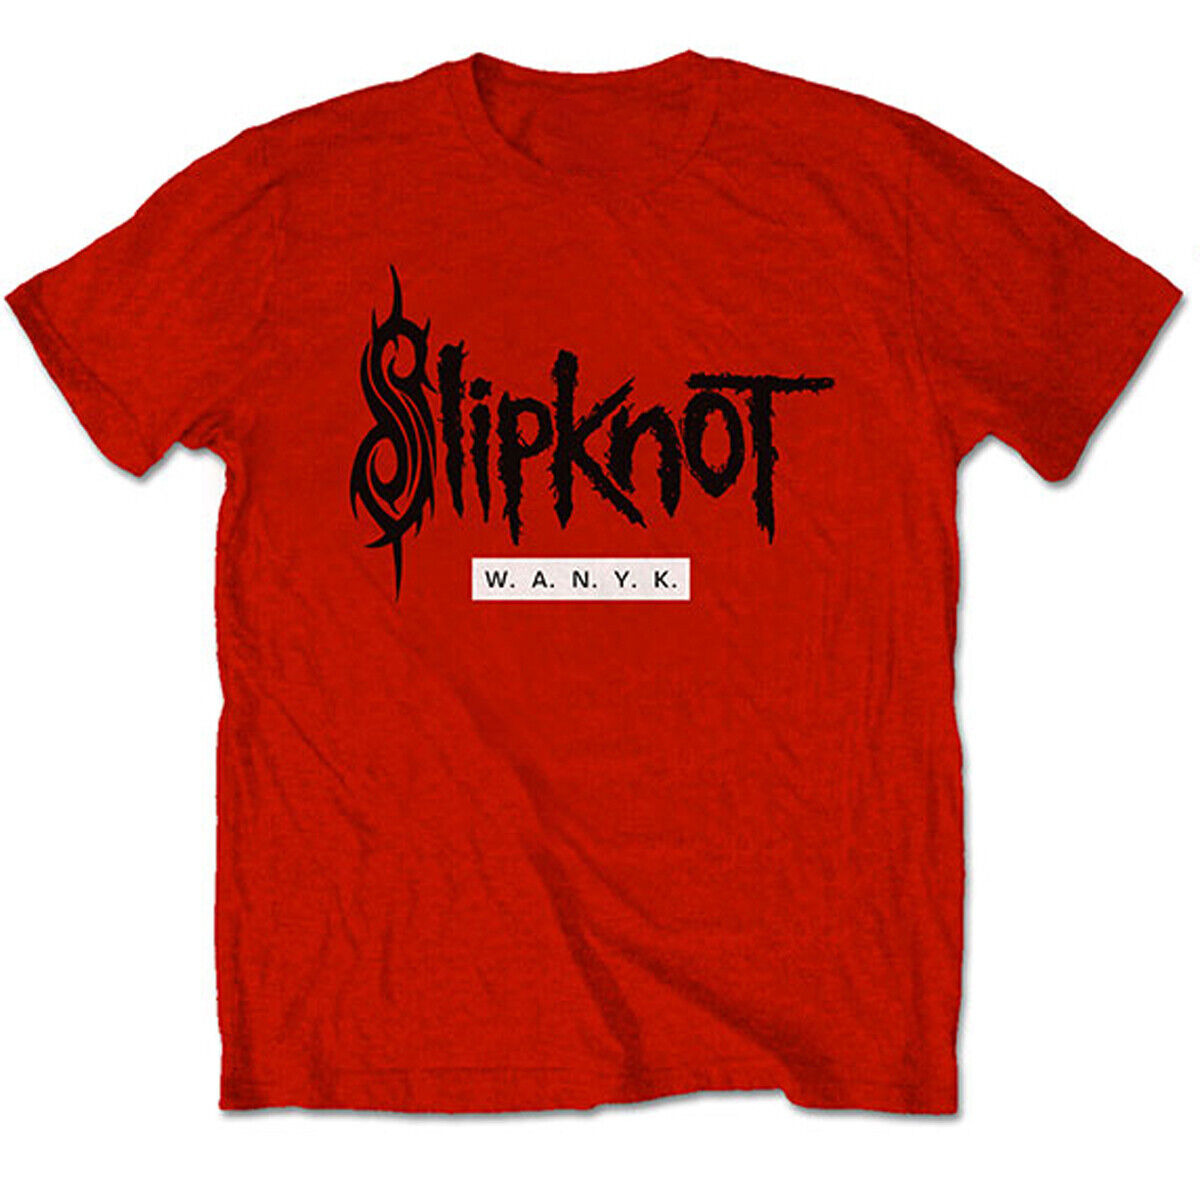 Slipknot W.a.n.y.k T-Shirt Short Sleeve Cotton Red Men All Size S to 5XL DA23